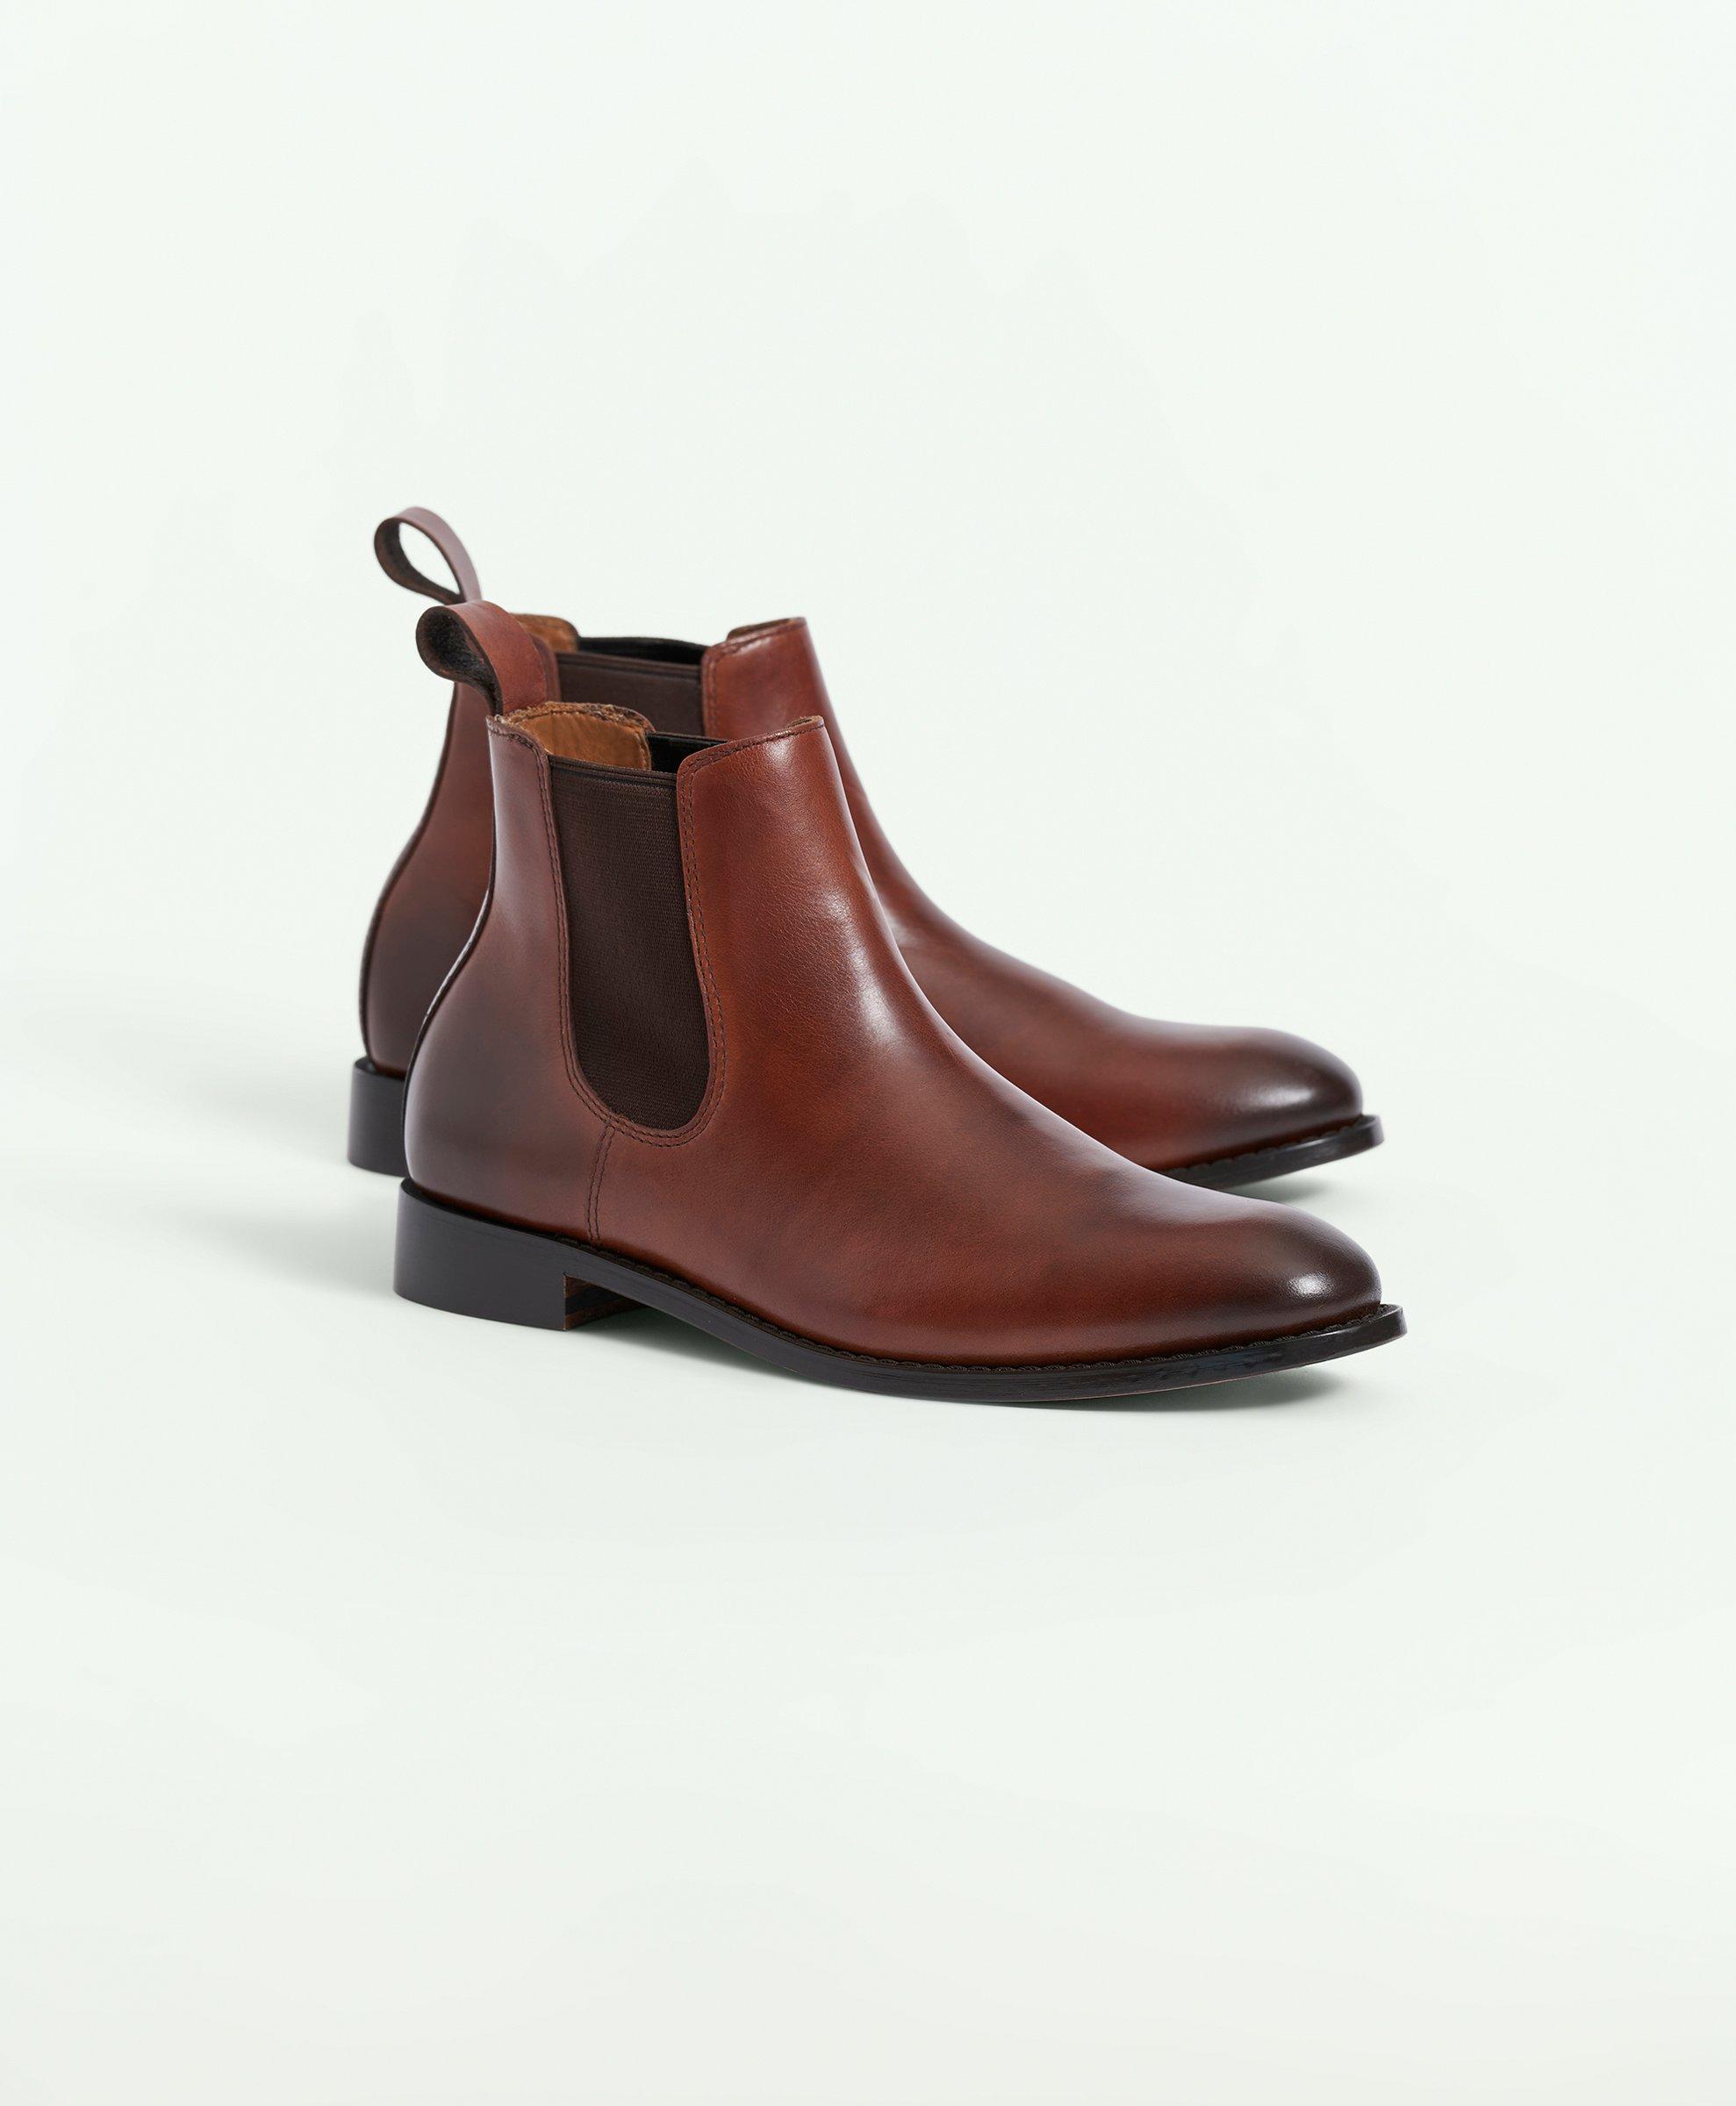 Brown Chelsea Boots for Men, Leather Chelsea Boots